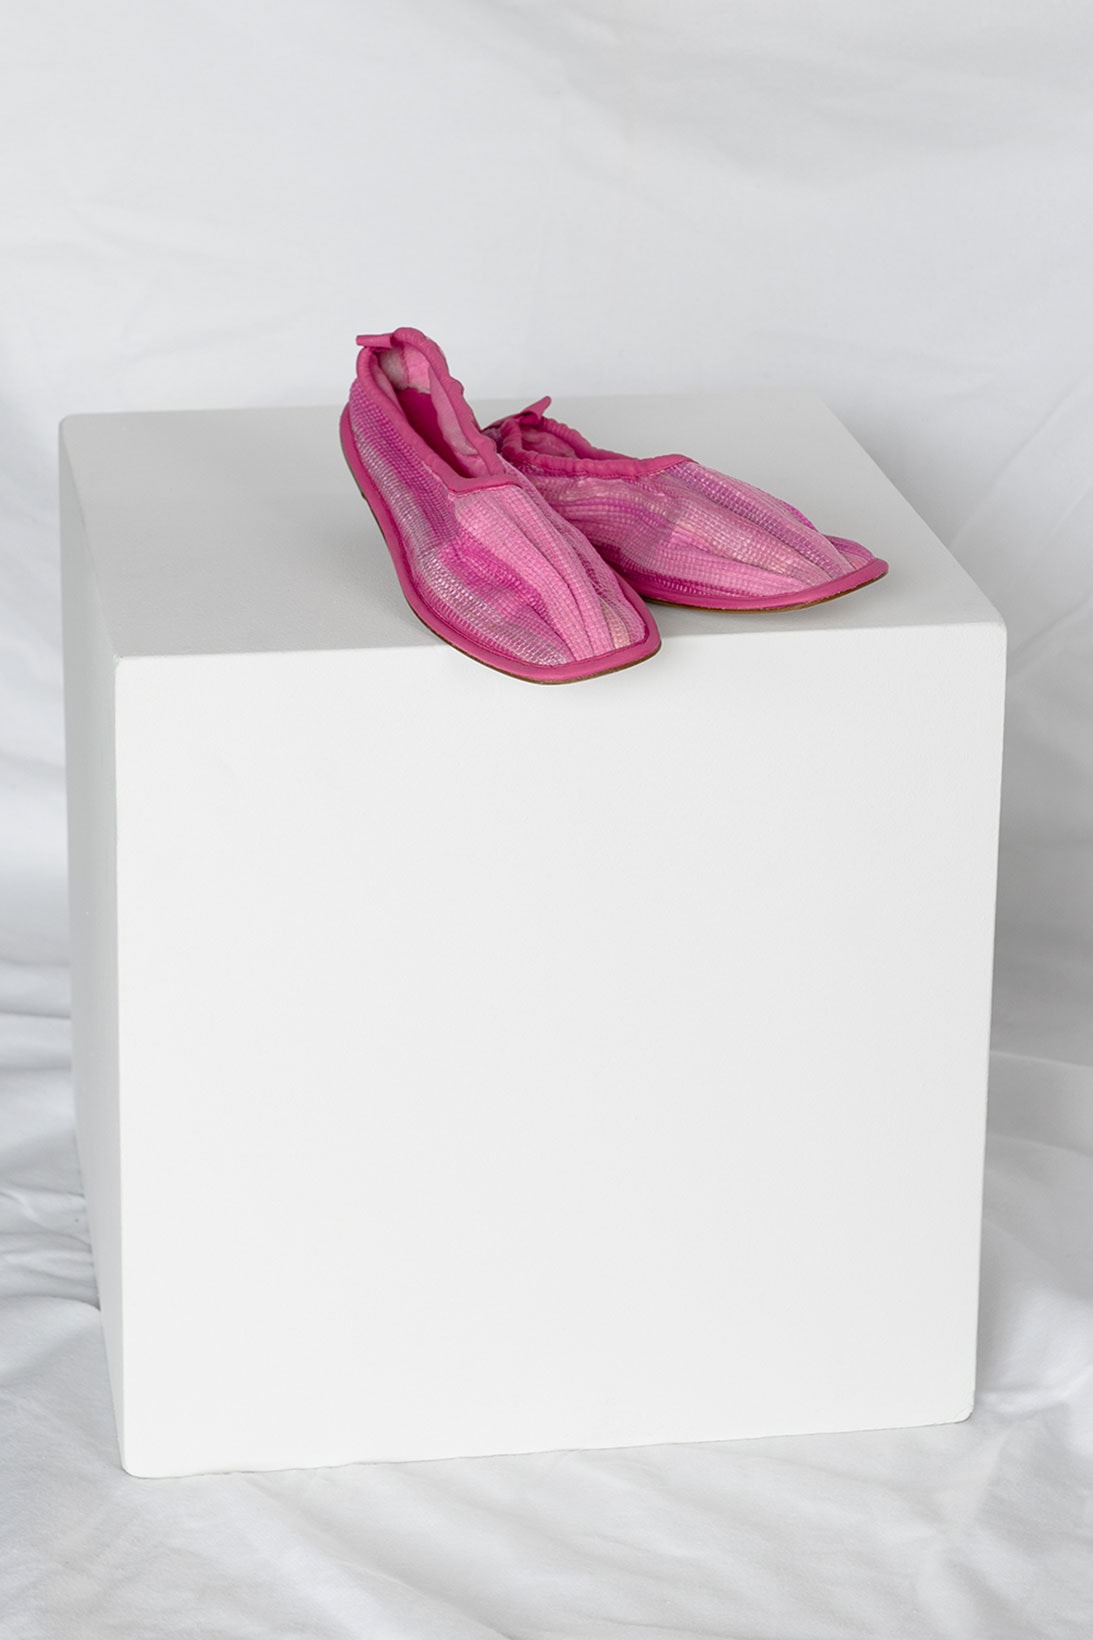 cecilie bahnsen hereu hyacinth flats shoes collaboration sustainable footwear pink